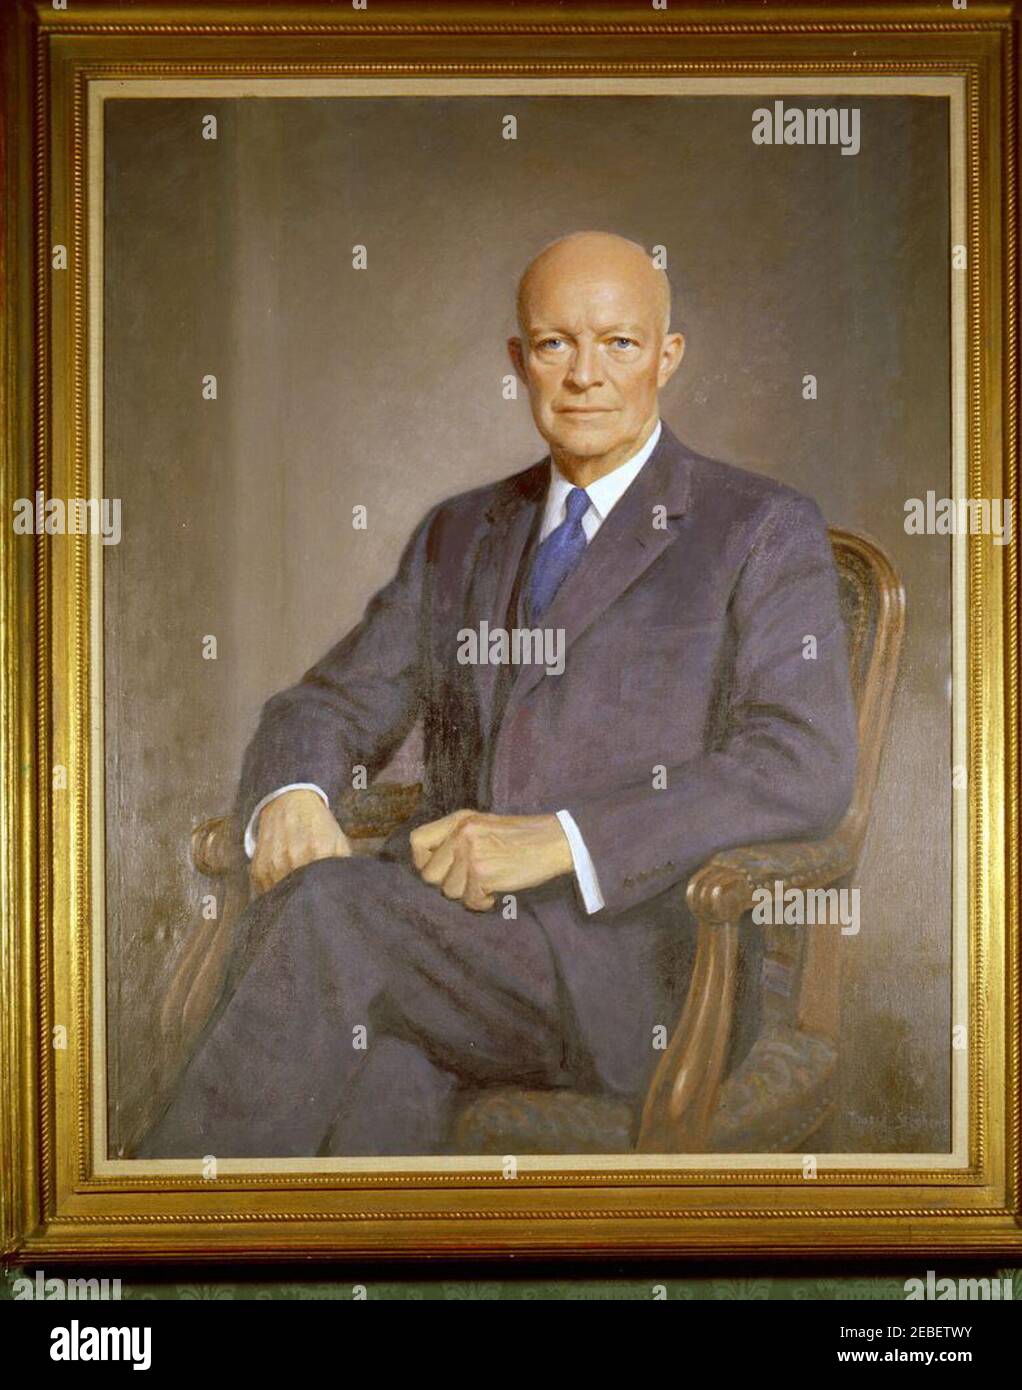 White House paintings, The Cup of Tea by Mary Cassatt, portraits of Dwight D. Eisenhower, Mamie Doud Eisenhower, Grace Coolidge, and Abraham Lincoln. Portrait of President Dwight D. Eisenhower by Thomas Edgar Stephens, 1960. Green Room, White House, Washington, D.C. Stock Photo